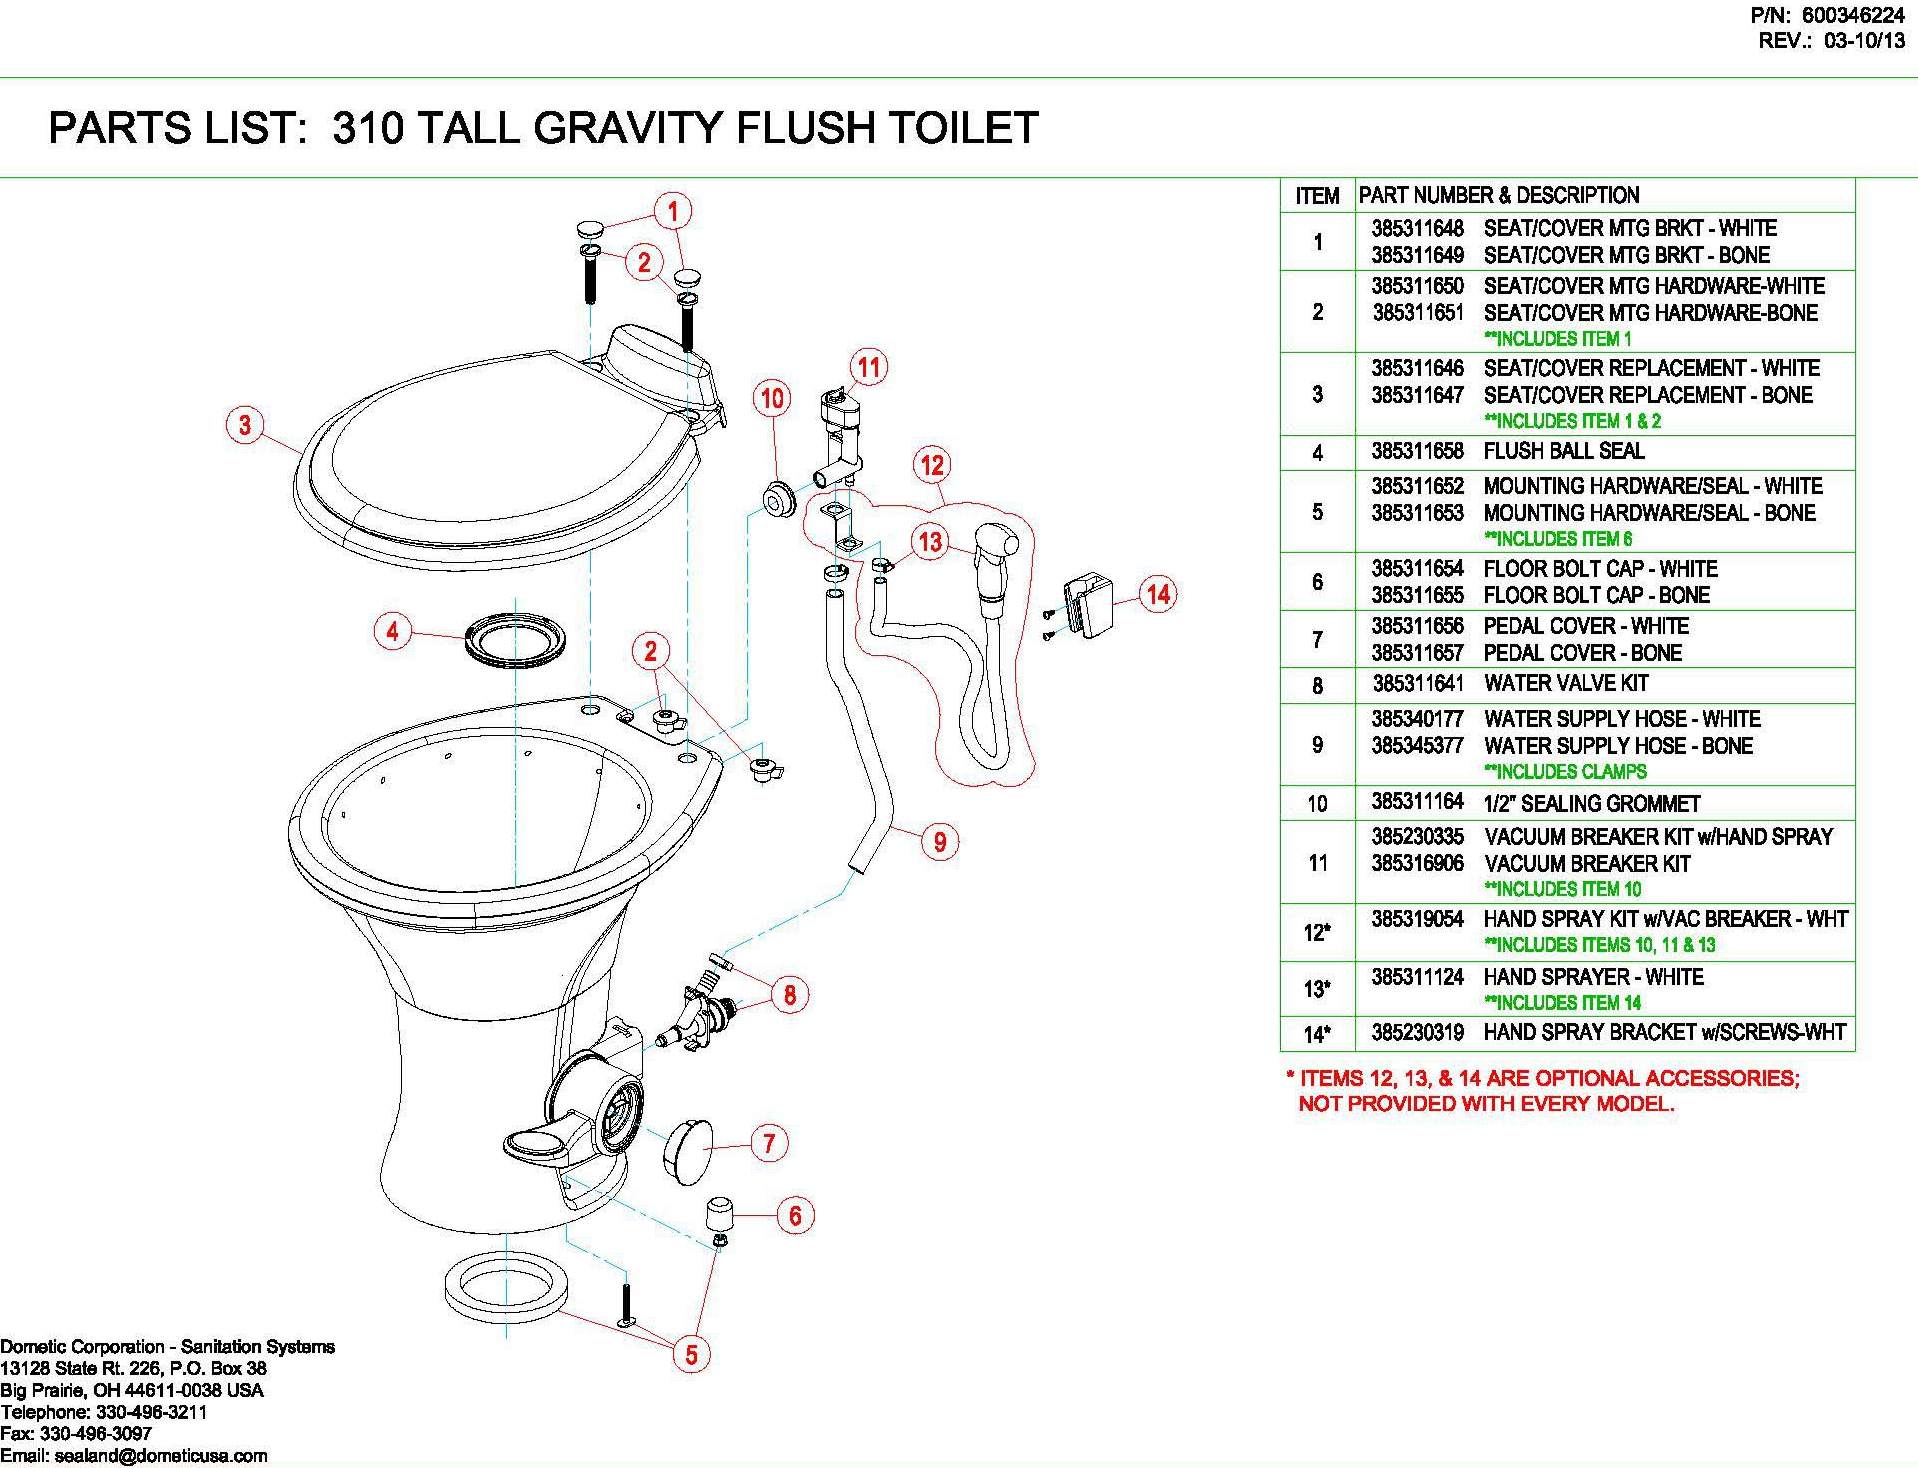 dometic-310-RV-Toilet-Parts-Diagram-and-List-from-heartland